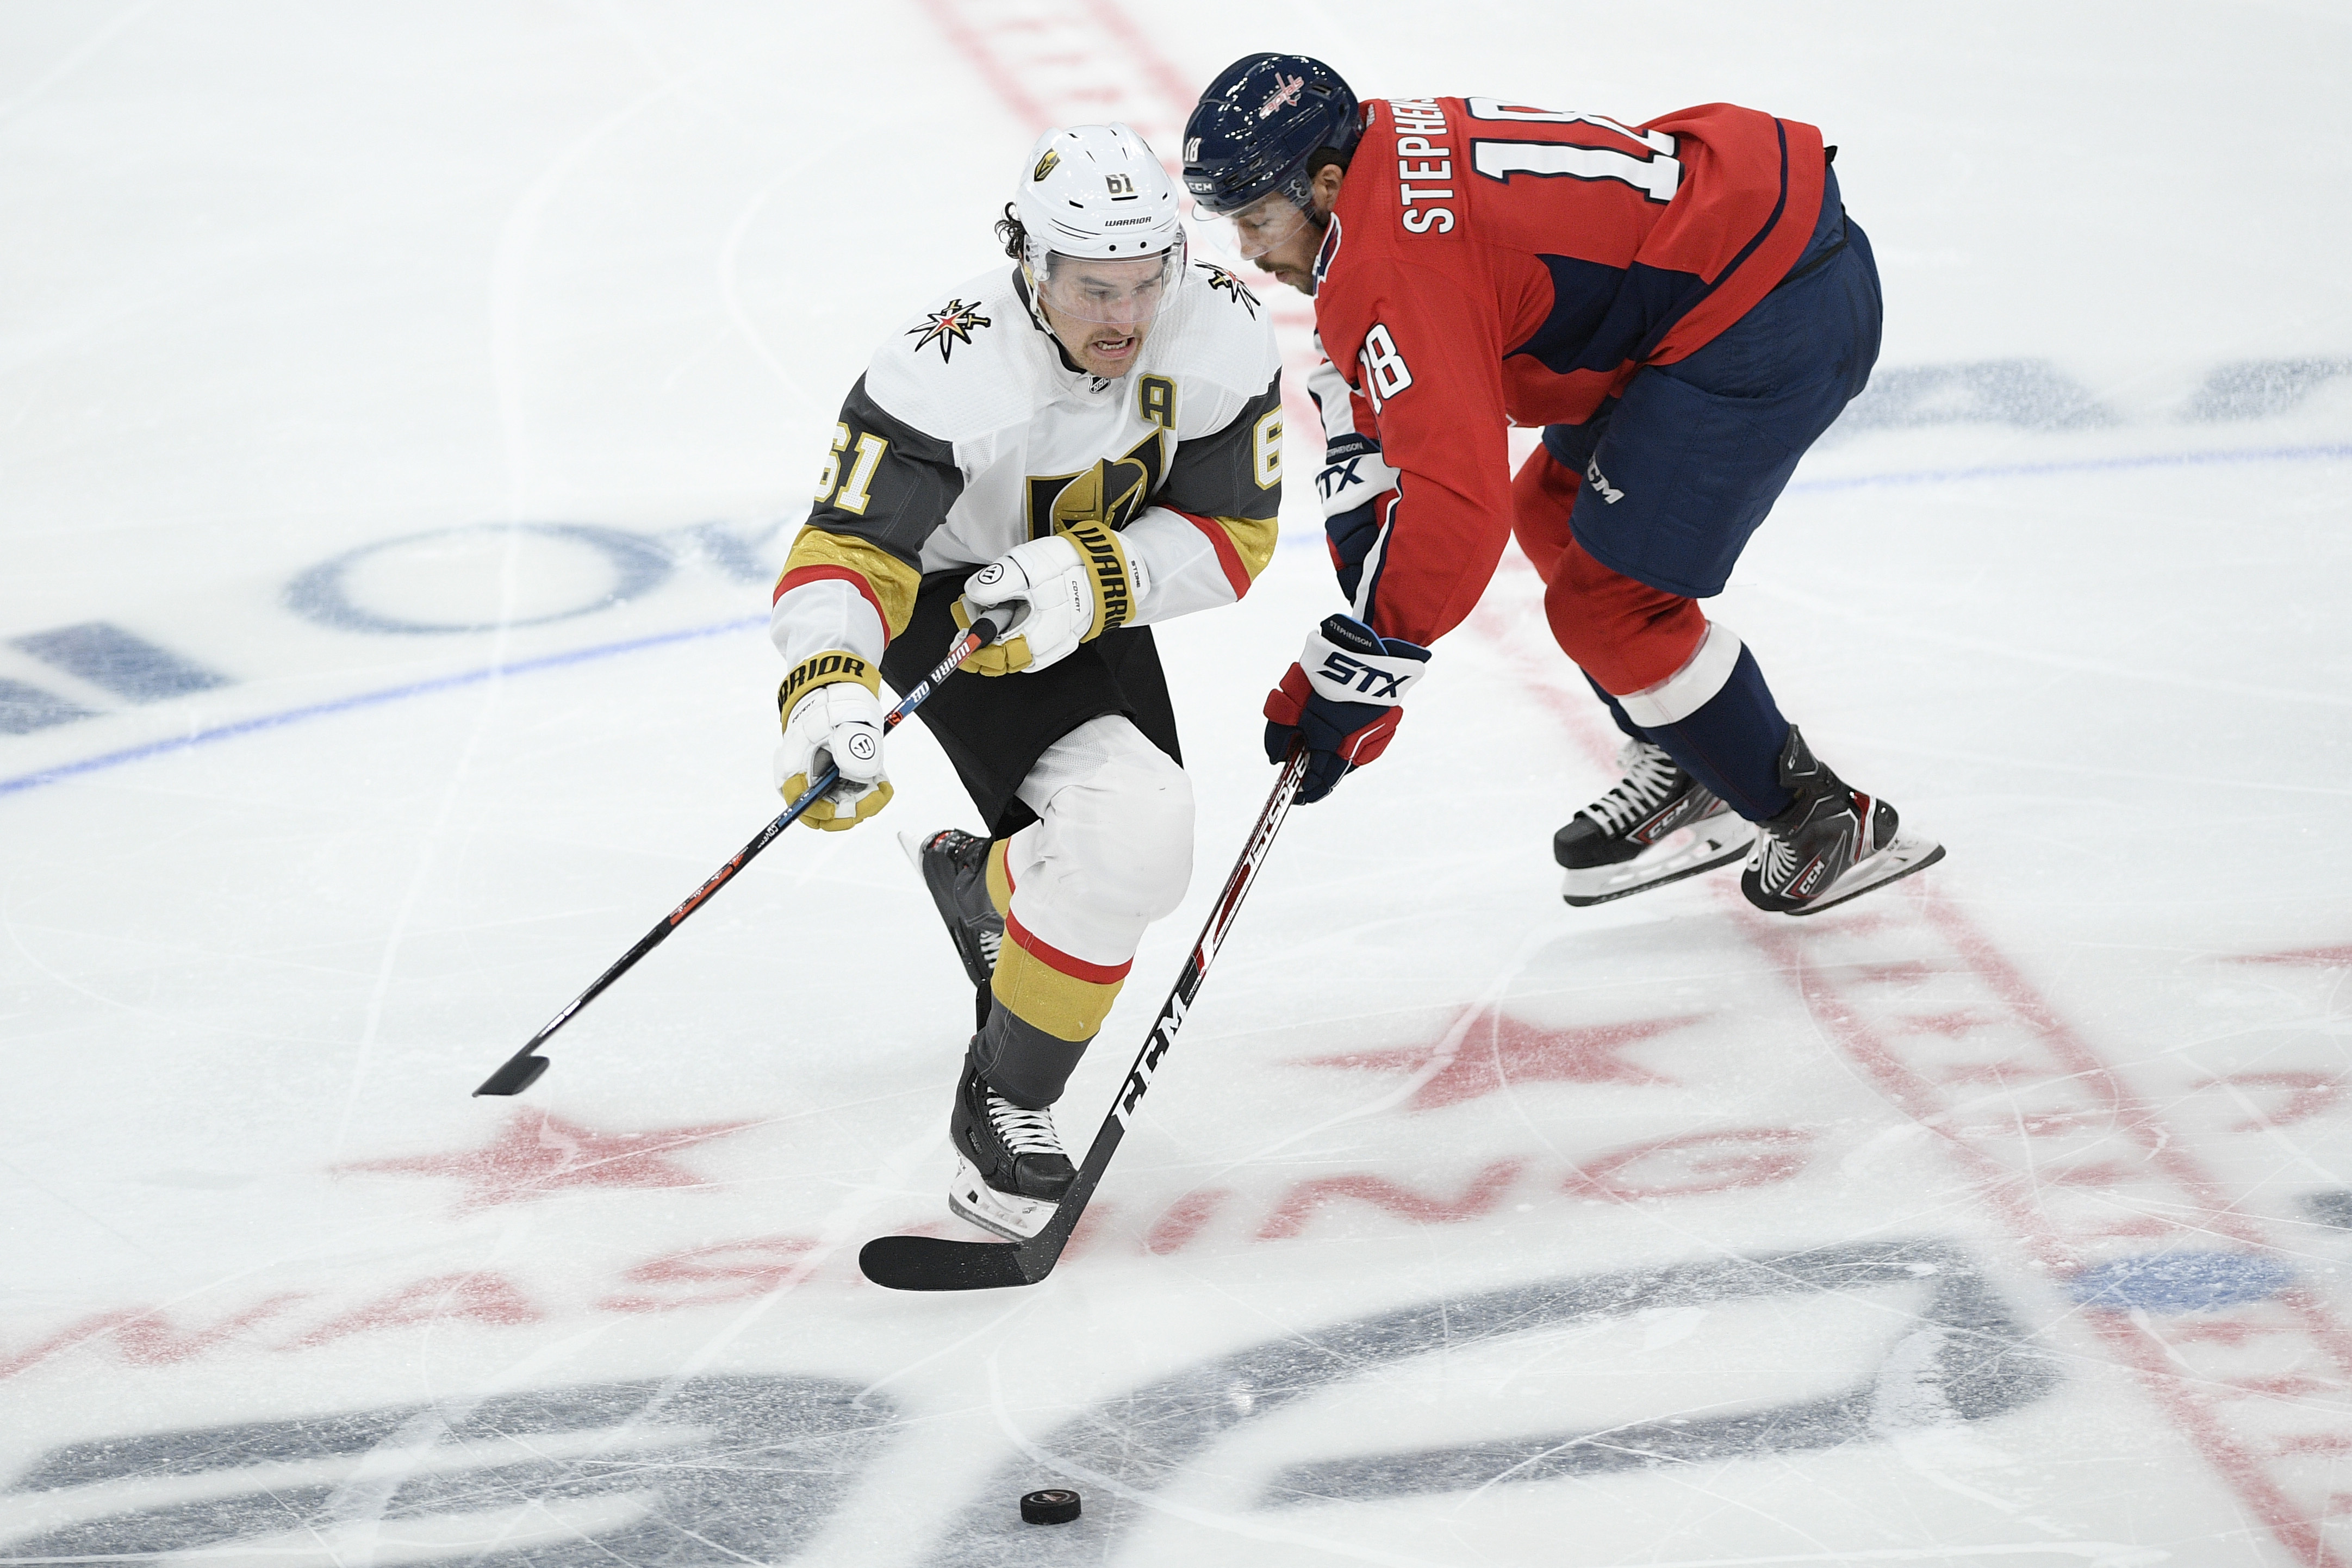 Since losing ’18 final, Golden Knights look more like Caps